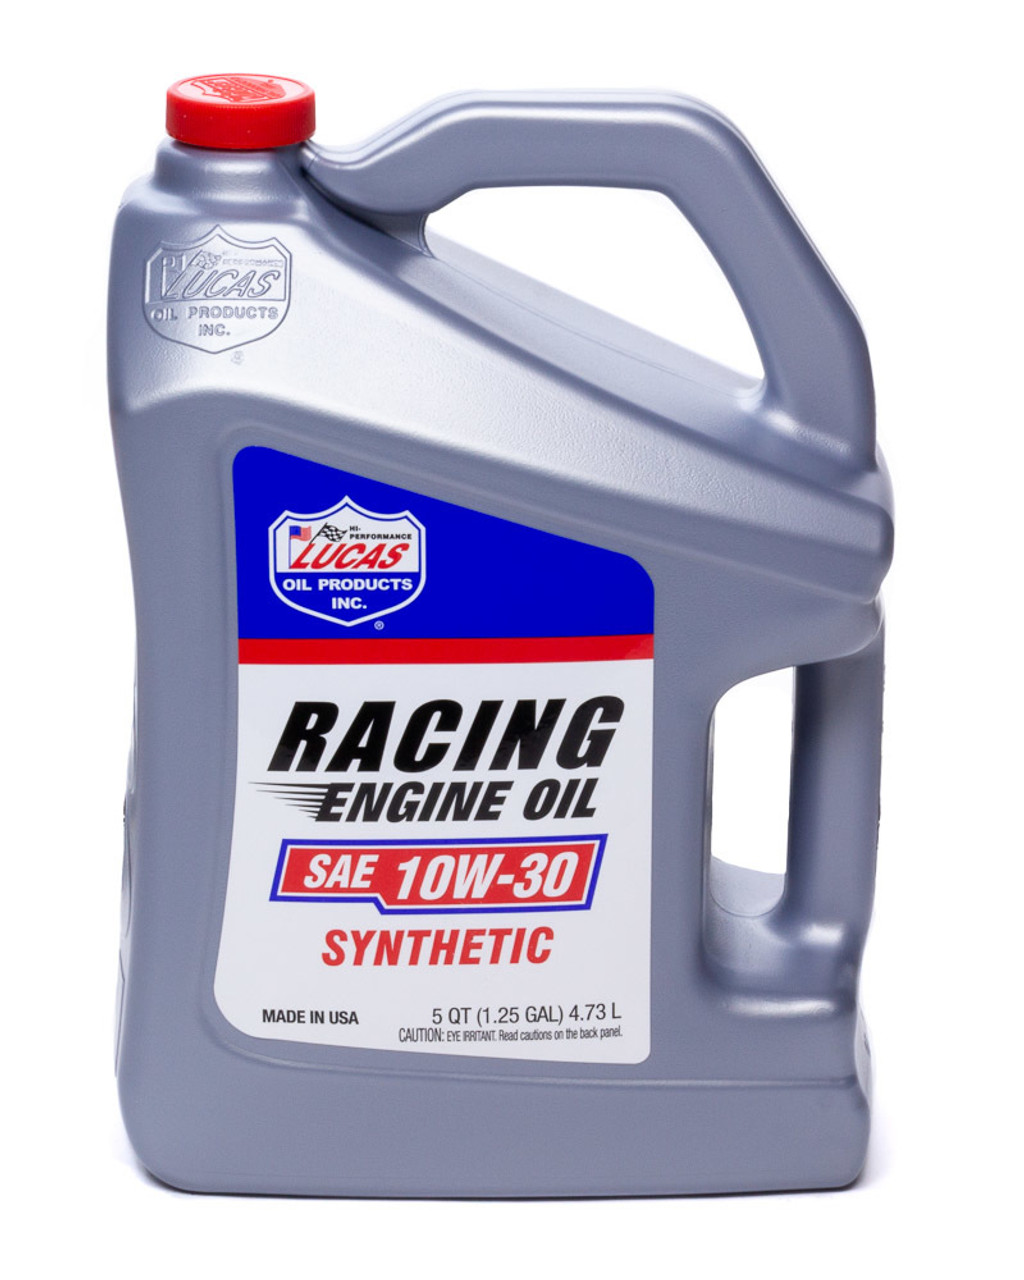 Synthetic Racing Oil 10w -30 5qt Bottle LUC10611